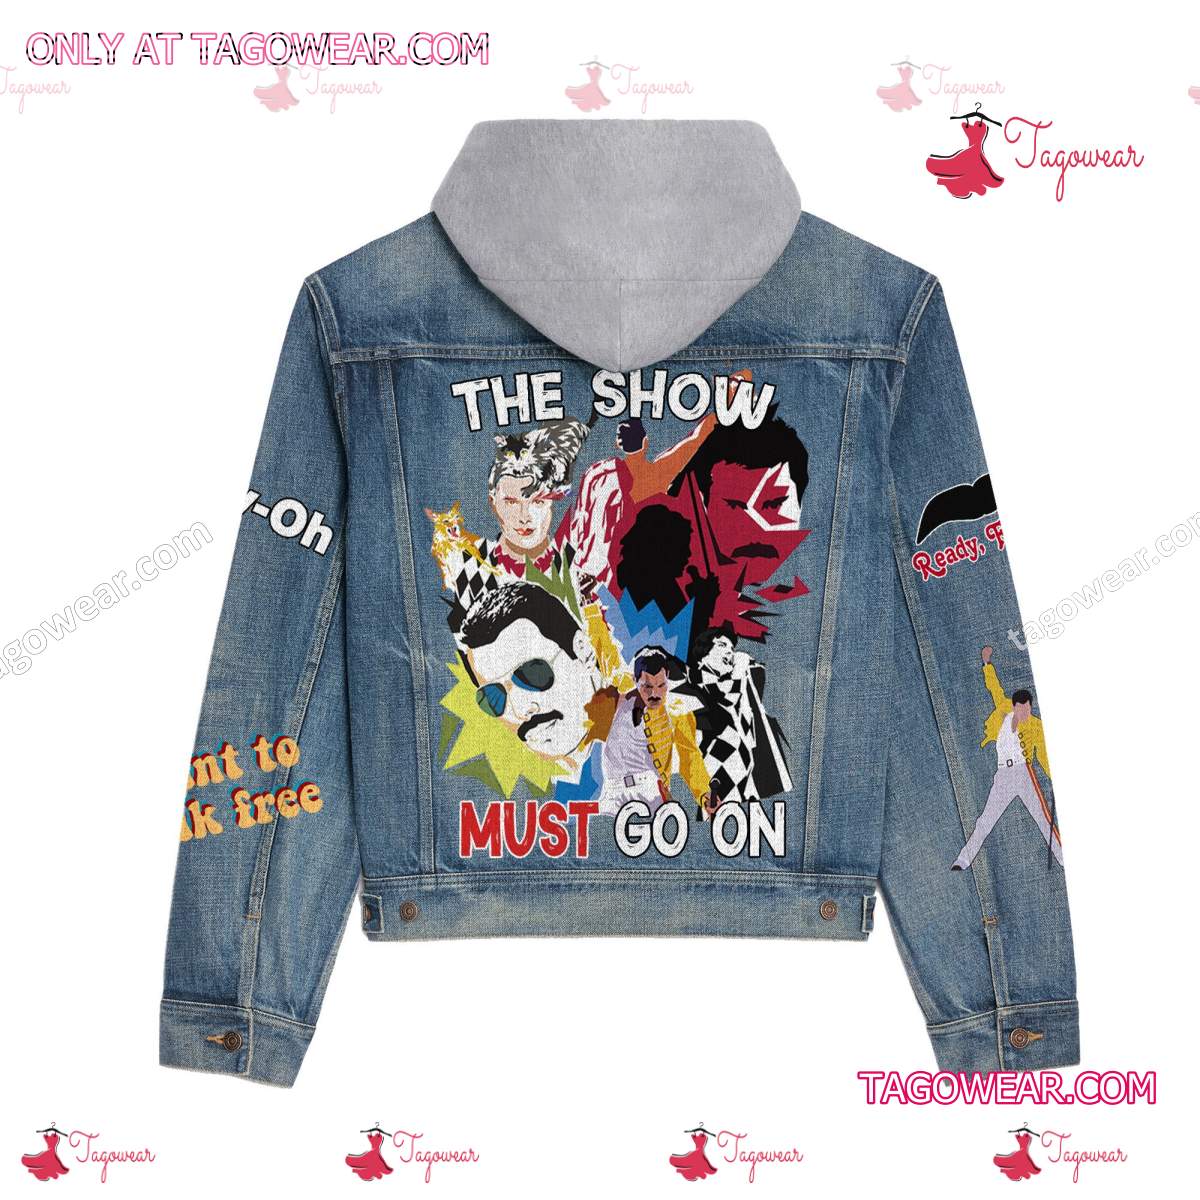 Queen Band The Show Must Go On Jean Jacket Hoodie a